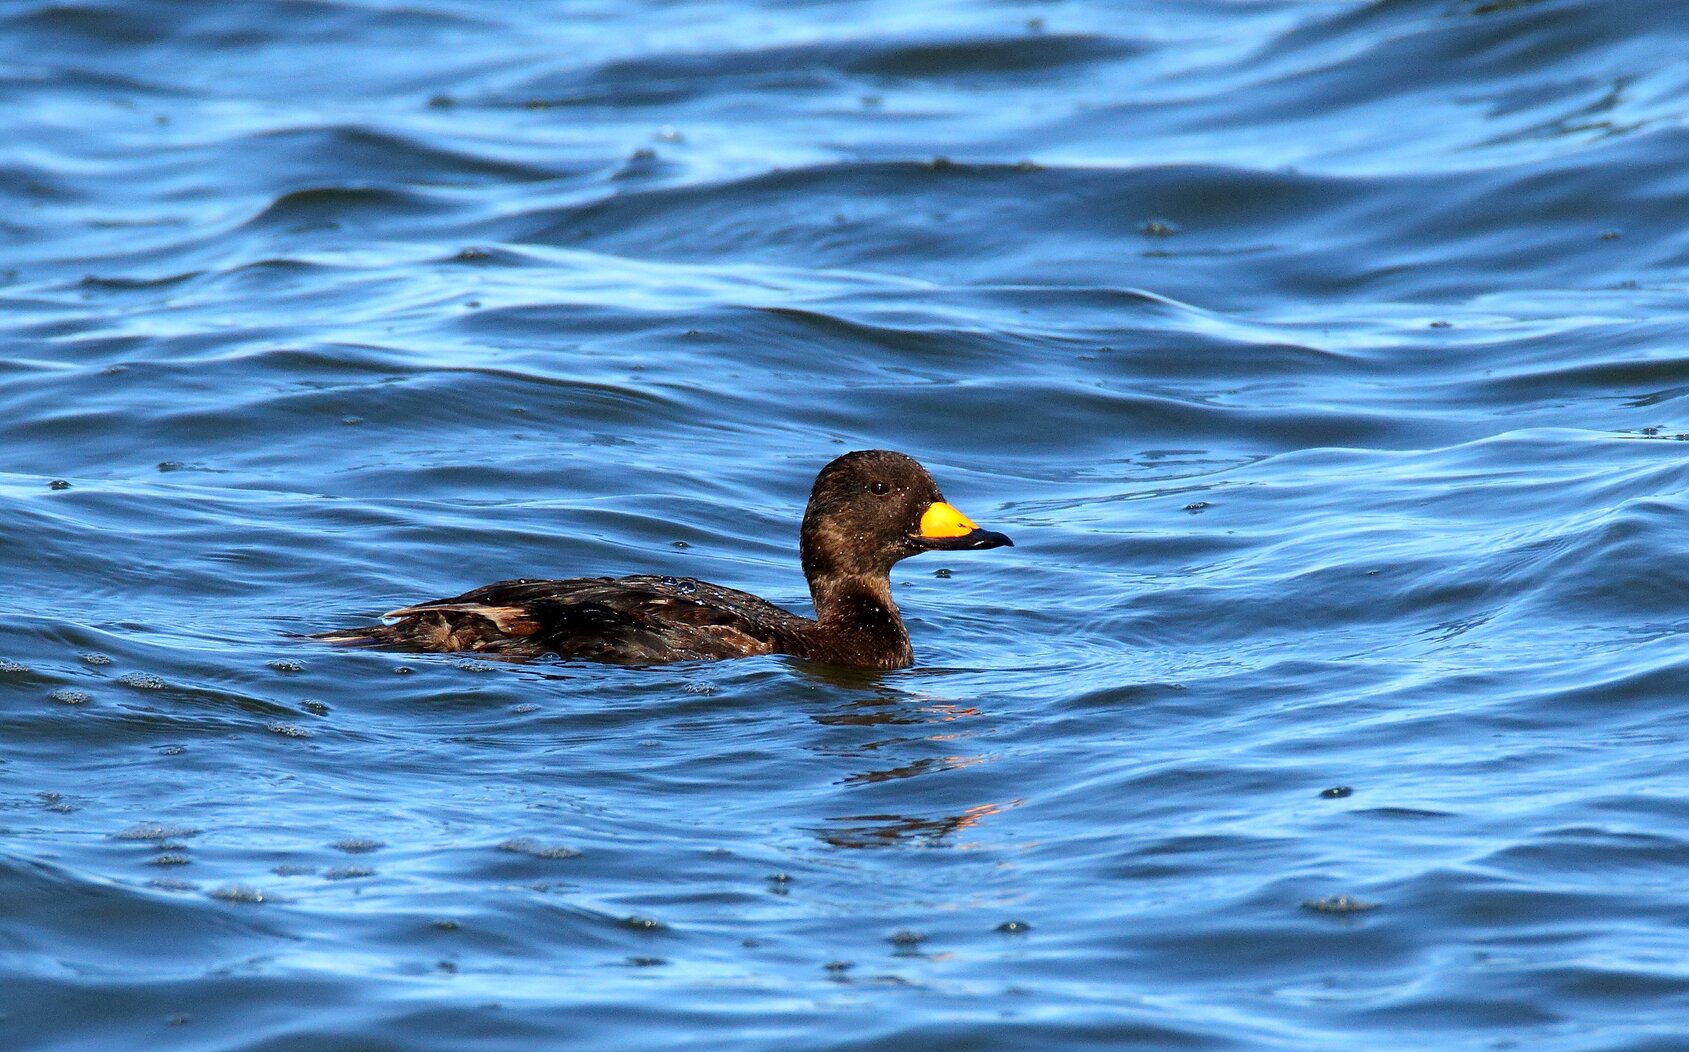 Many diving ducks including Black Scoter can be found in the Narrows. Photo: <a href="https://www.flickr.com/photos/120553232@N02/" target="_blank" >Isaac Grant</a>